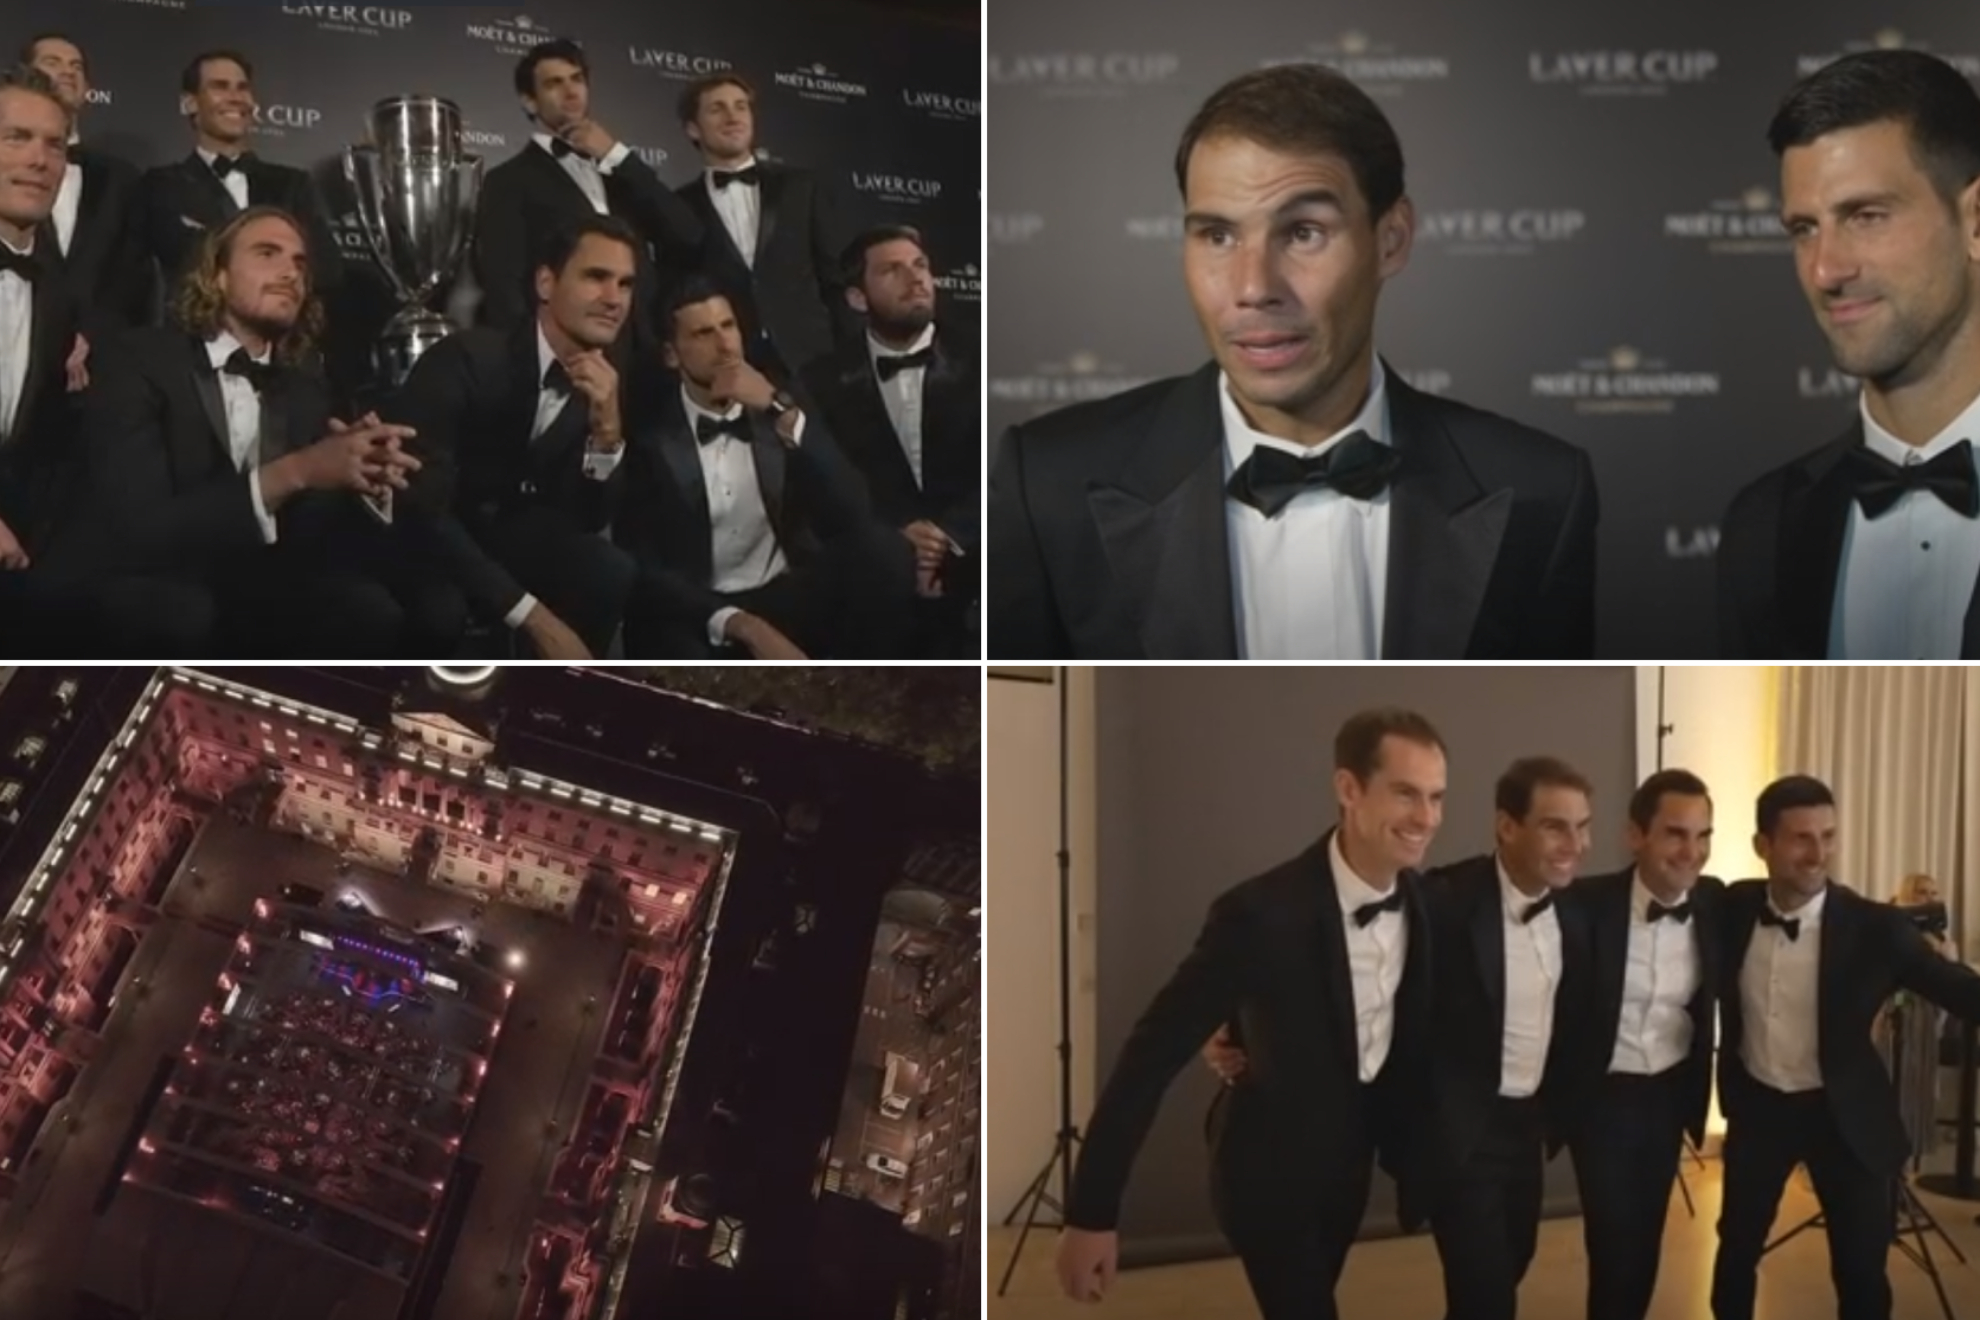 Behind the scenes at Roger Federer's farewell party: Nadal's gestures, emotional messages, and more unseen bits...